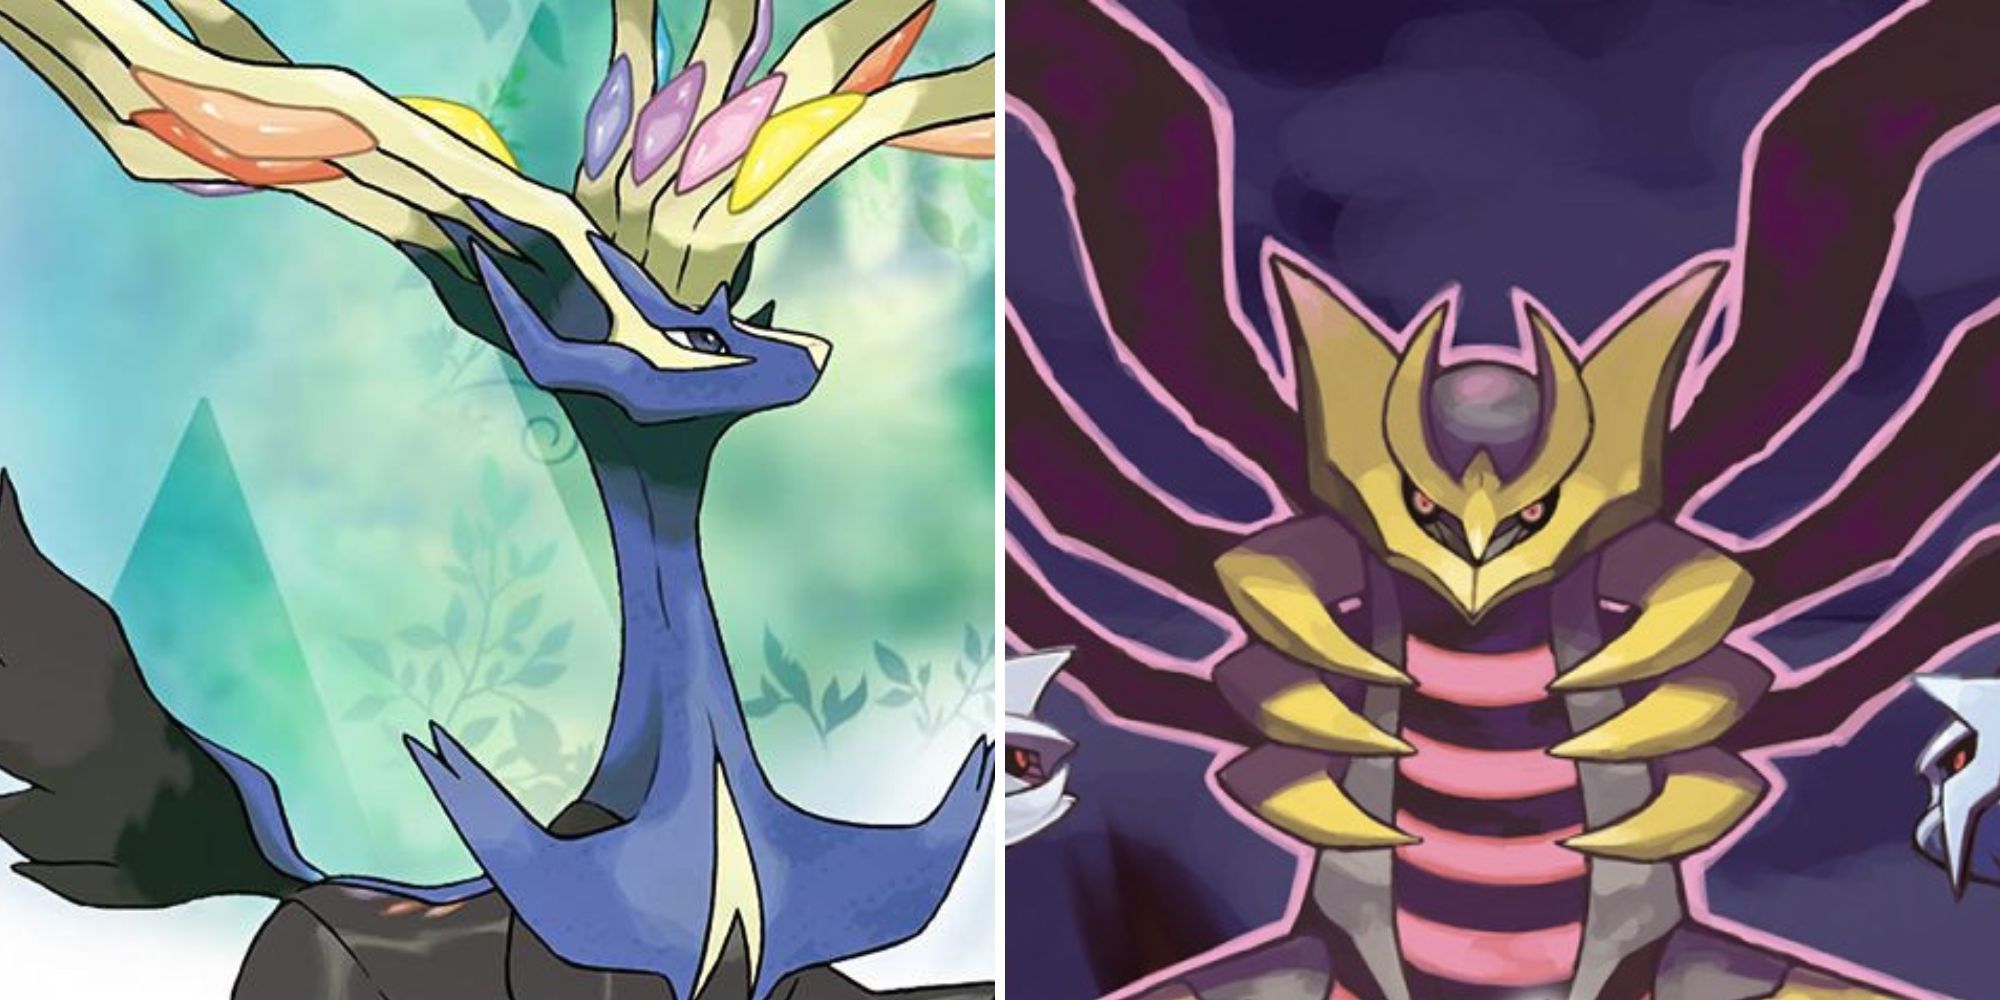 Cover art from both Pokemon X and Pokemon Platinum showing the legendary Pokemon from both